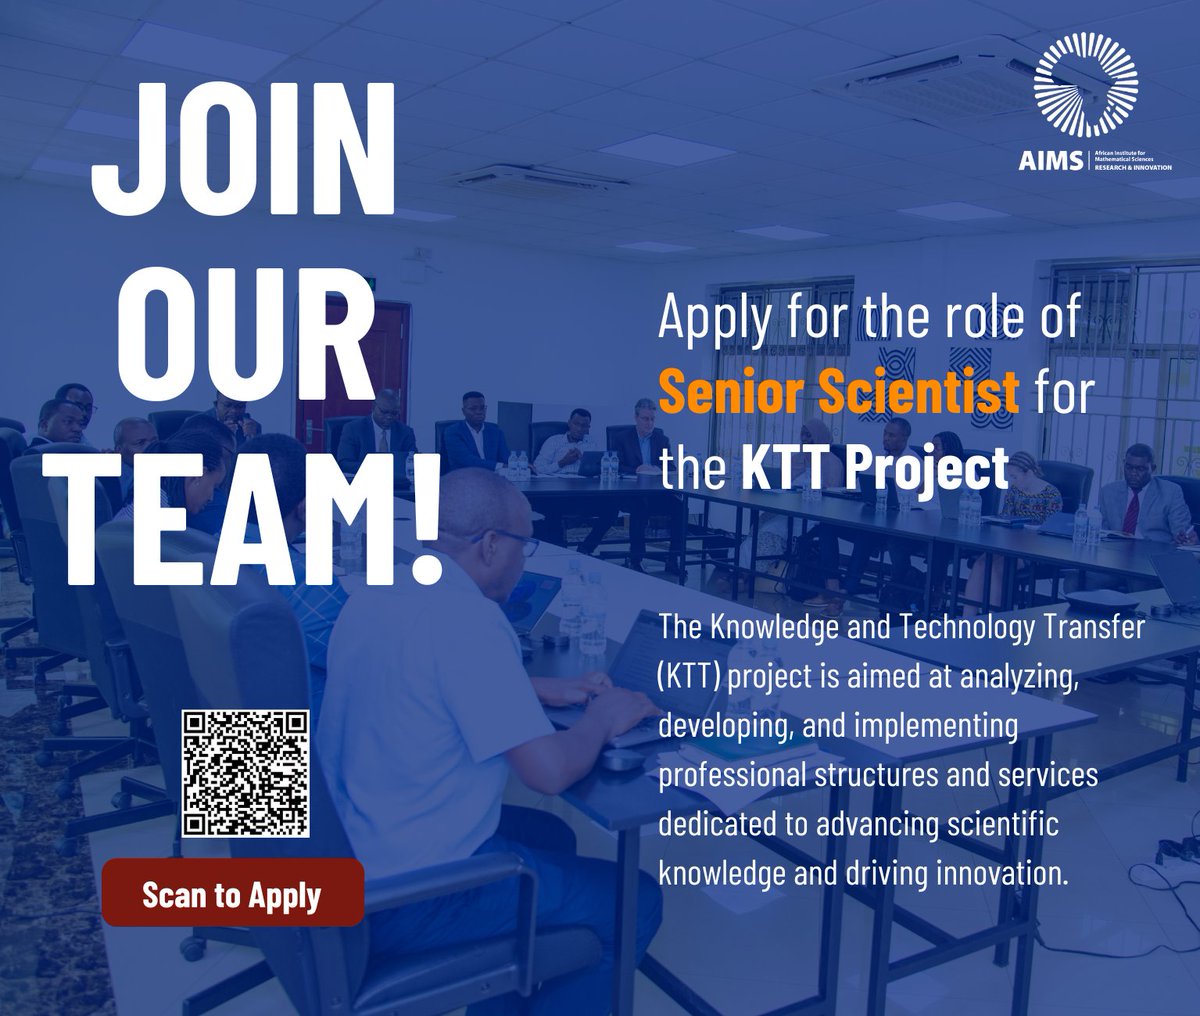 #JoinOurTeam! Funded by @BMBF_Bund through @unikoblenzde, the Knowledge & Technology Transfer (KTT) project will analyze, develop, & #implement professional structures & services dedicated to advancing #scientific knowledge & driving innovation. Visit research.nexteinstein.org/application/ca…